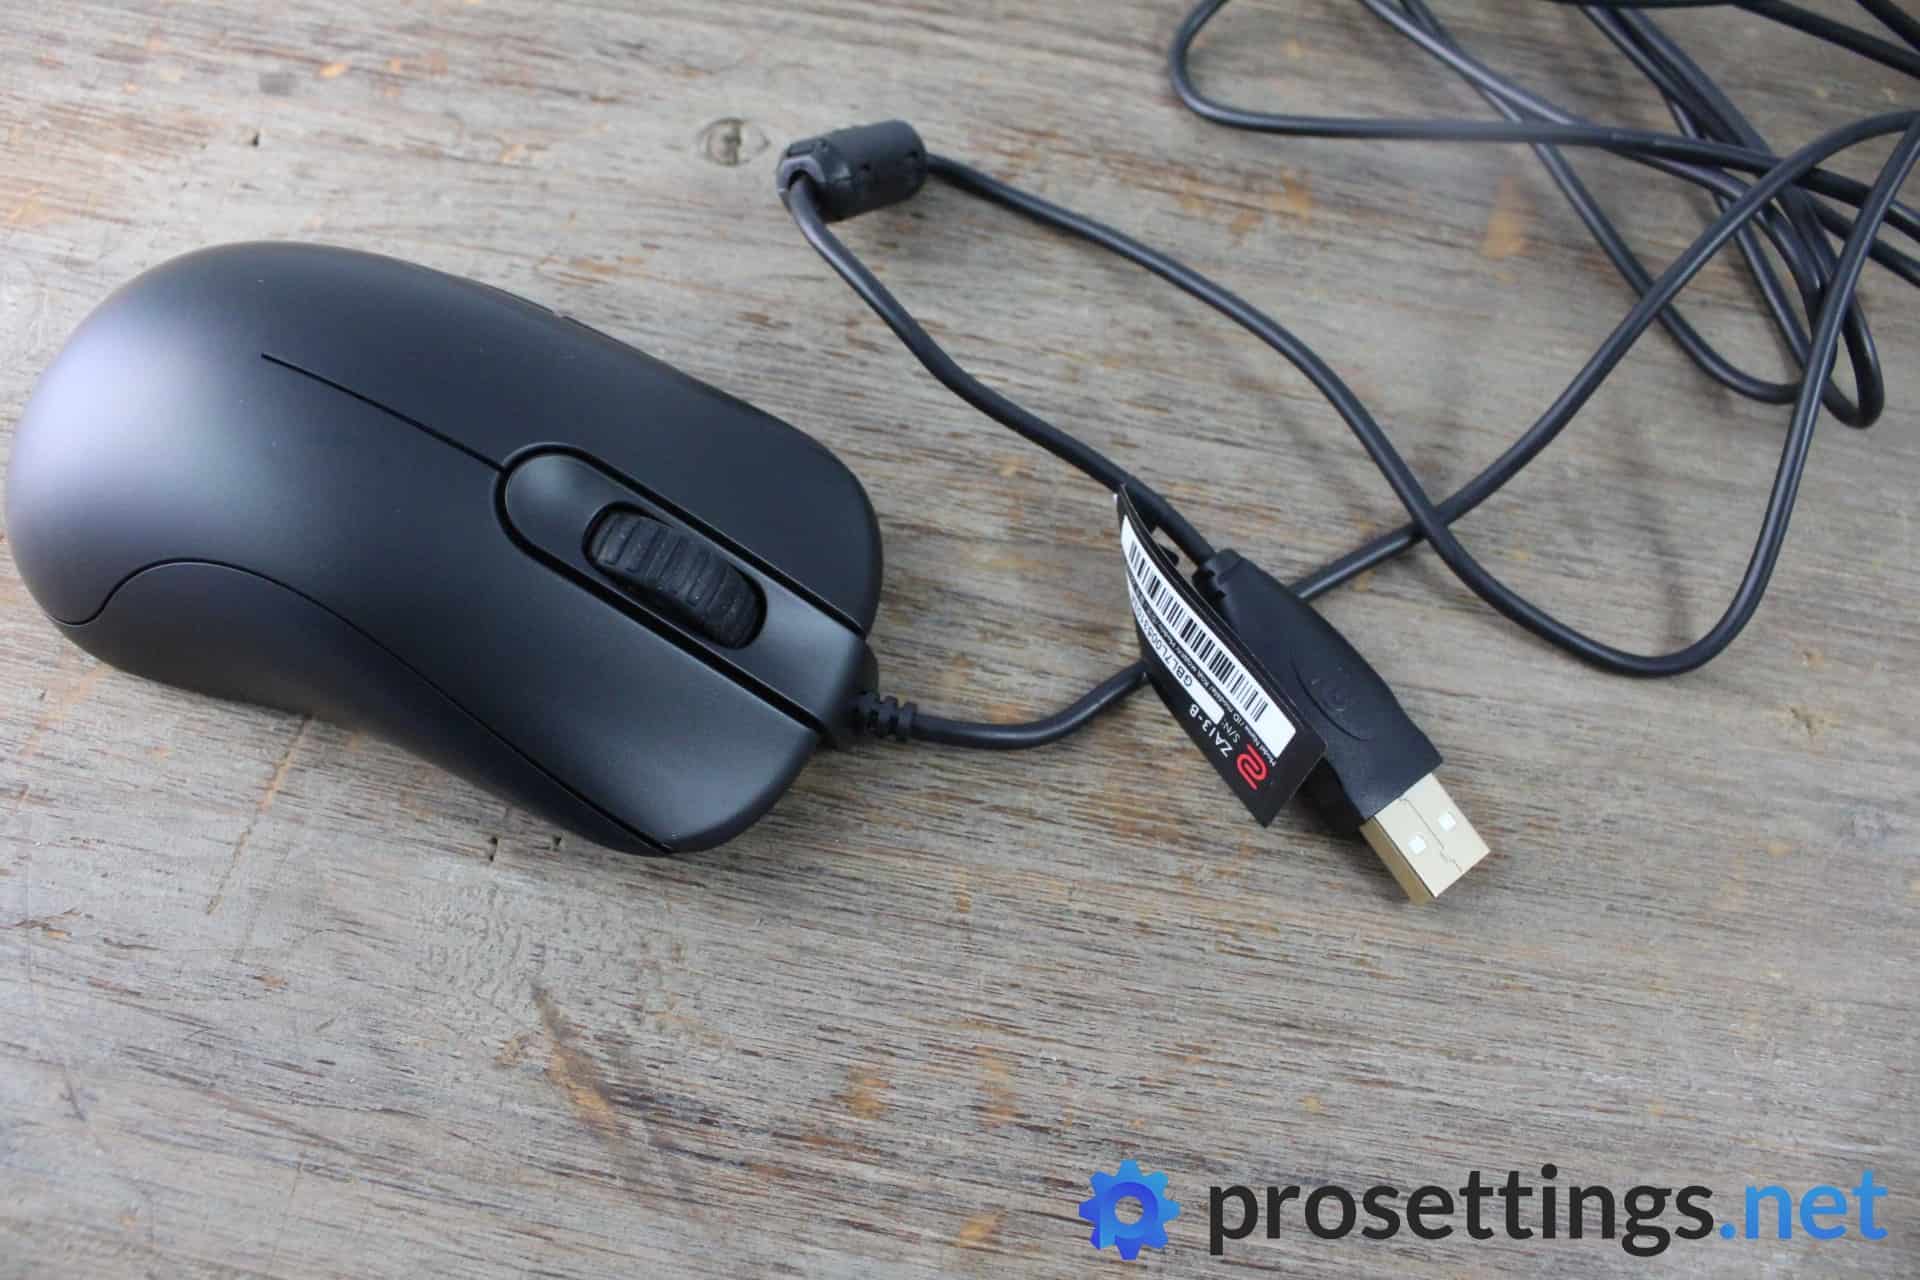 Zowie ZA13-B Mouse Review